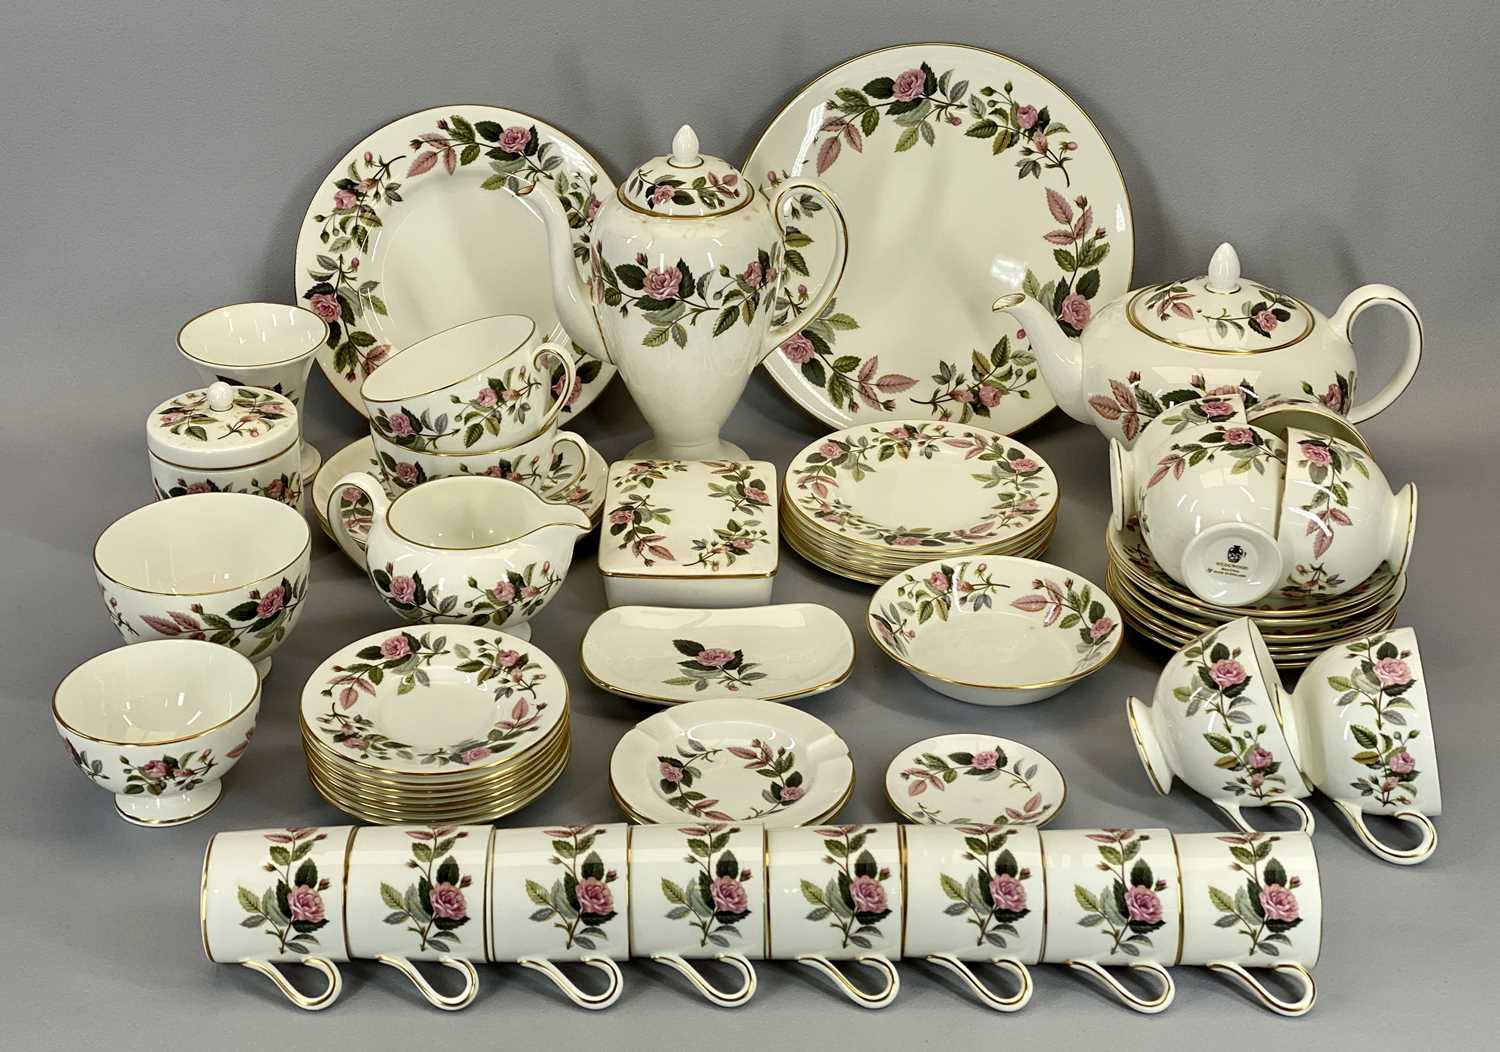 WEDGWOOD 'HATHAWAY ROSE' TEA & OTHER WARE - approximately fifty three pieces - Image 2 of 2